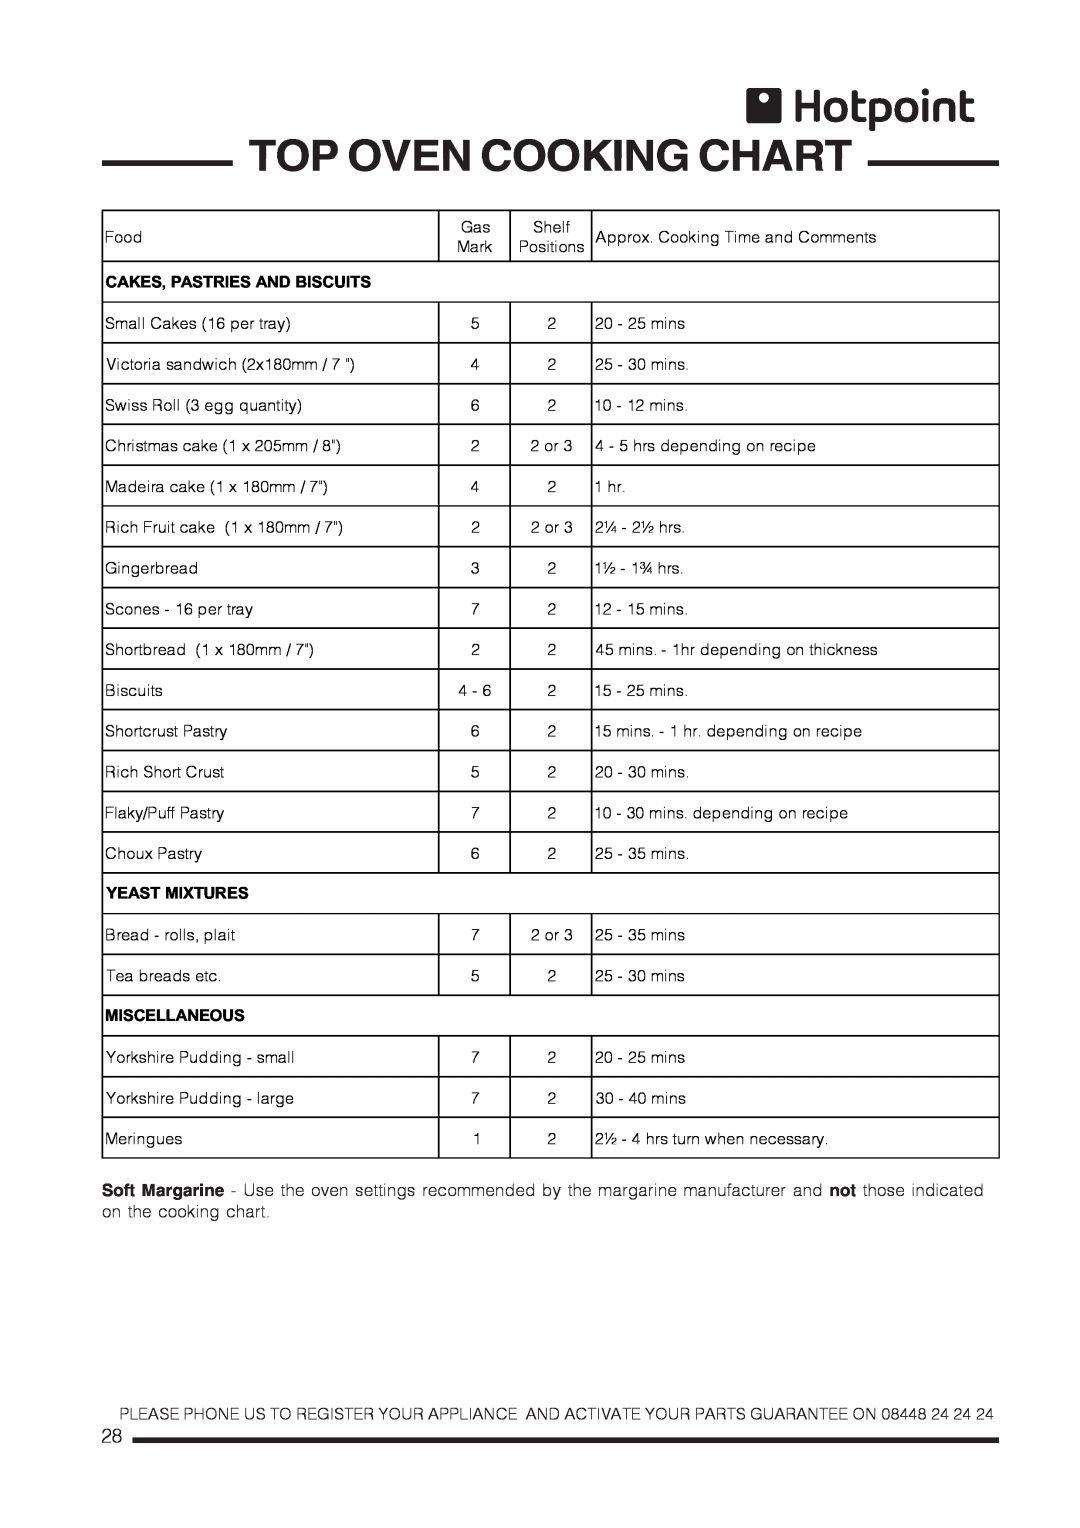 Hotpoint ch60gpcf, ch60gpxf installation instructions Top Oven Cooking Chart 